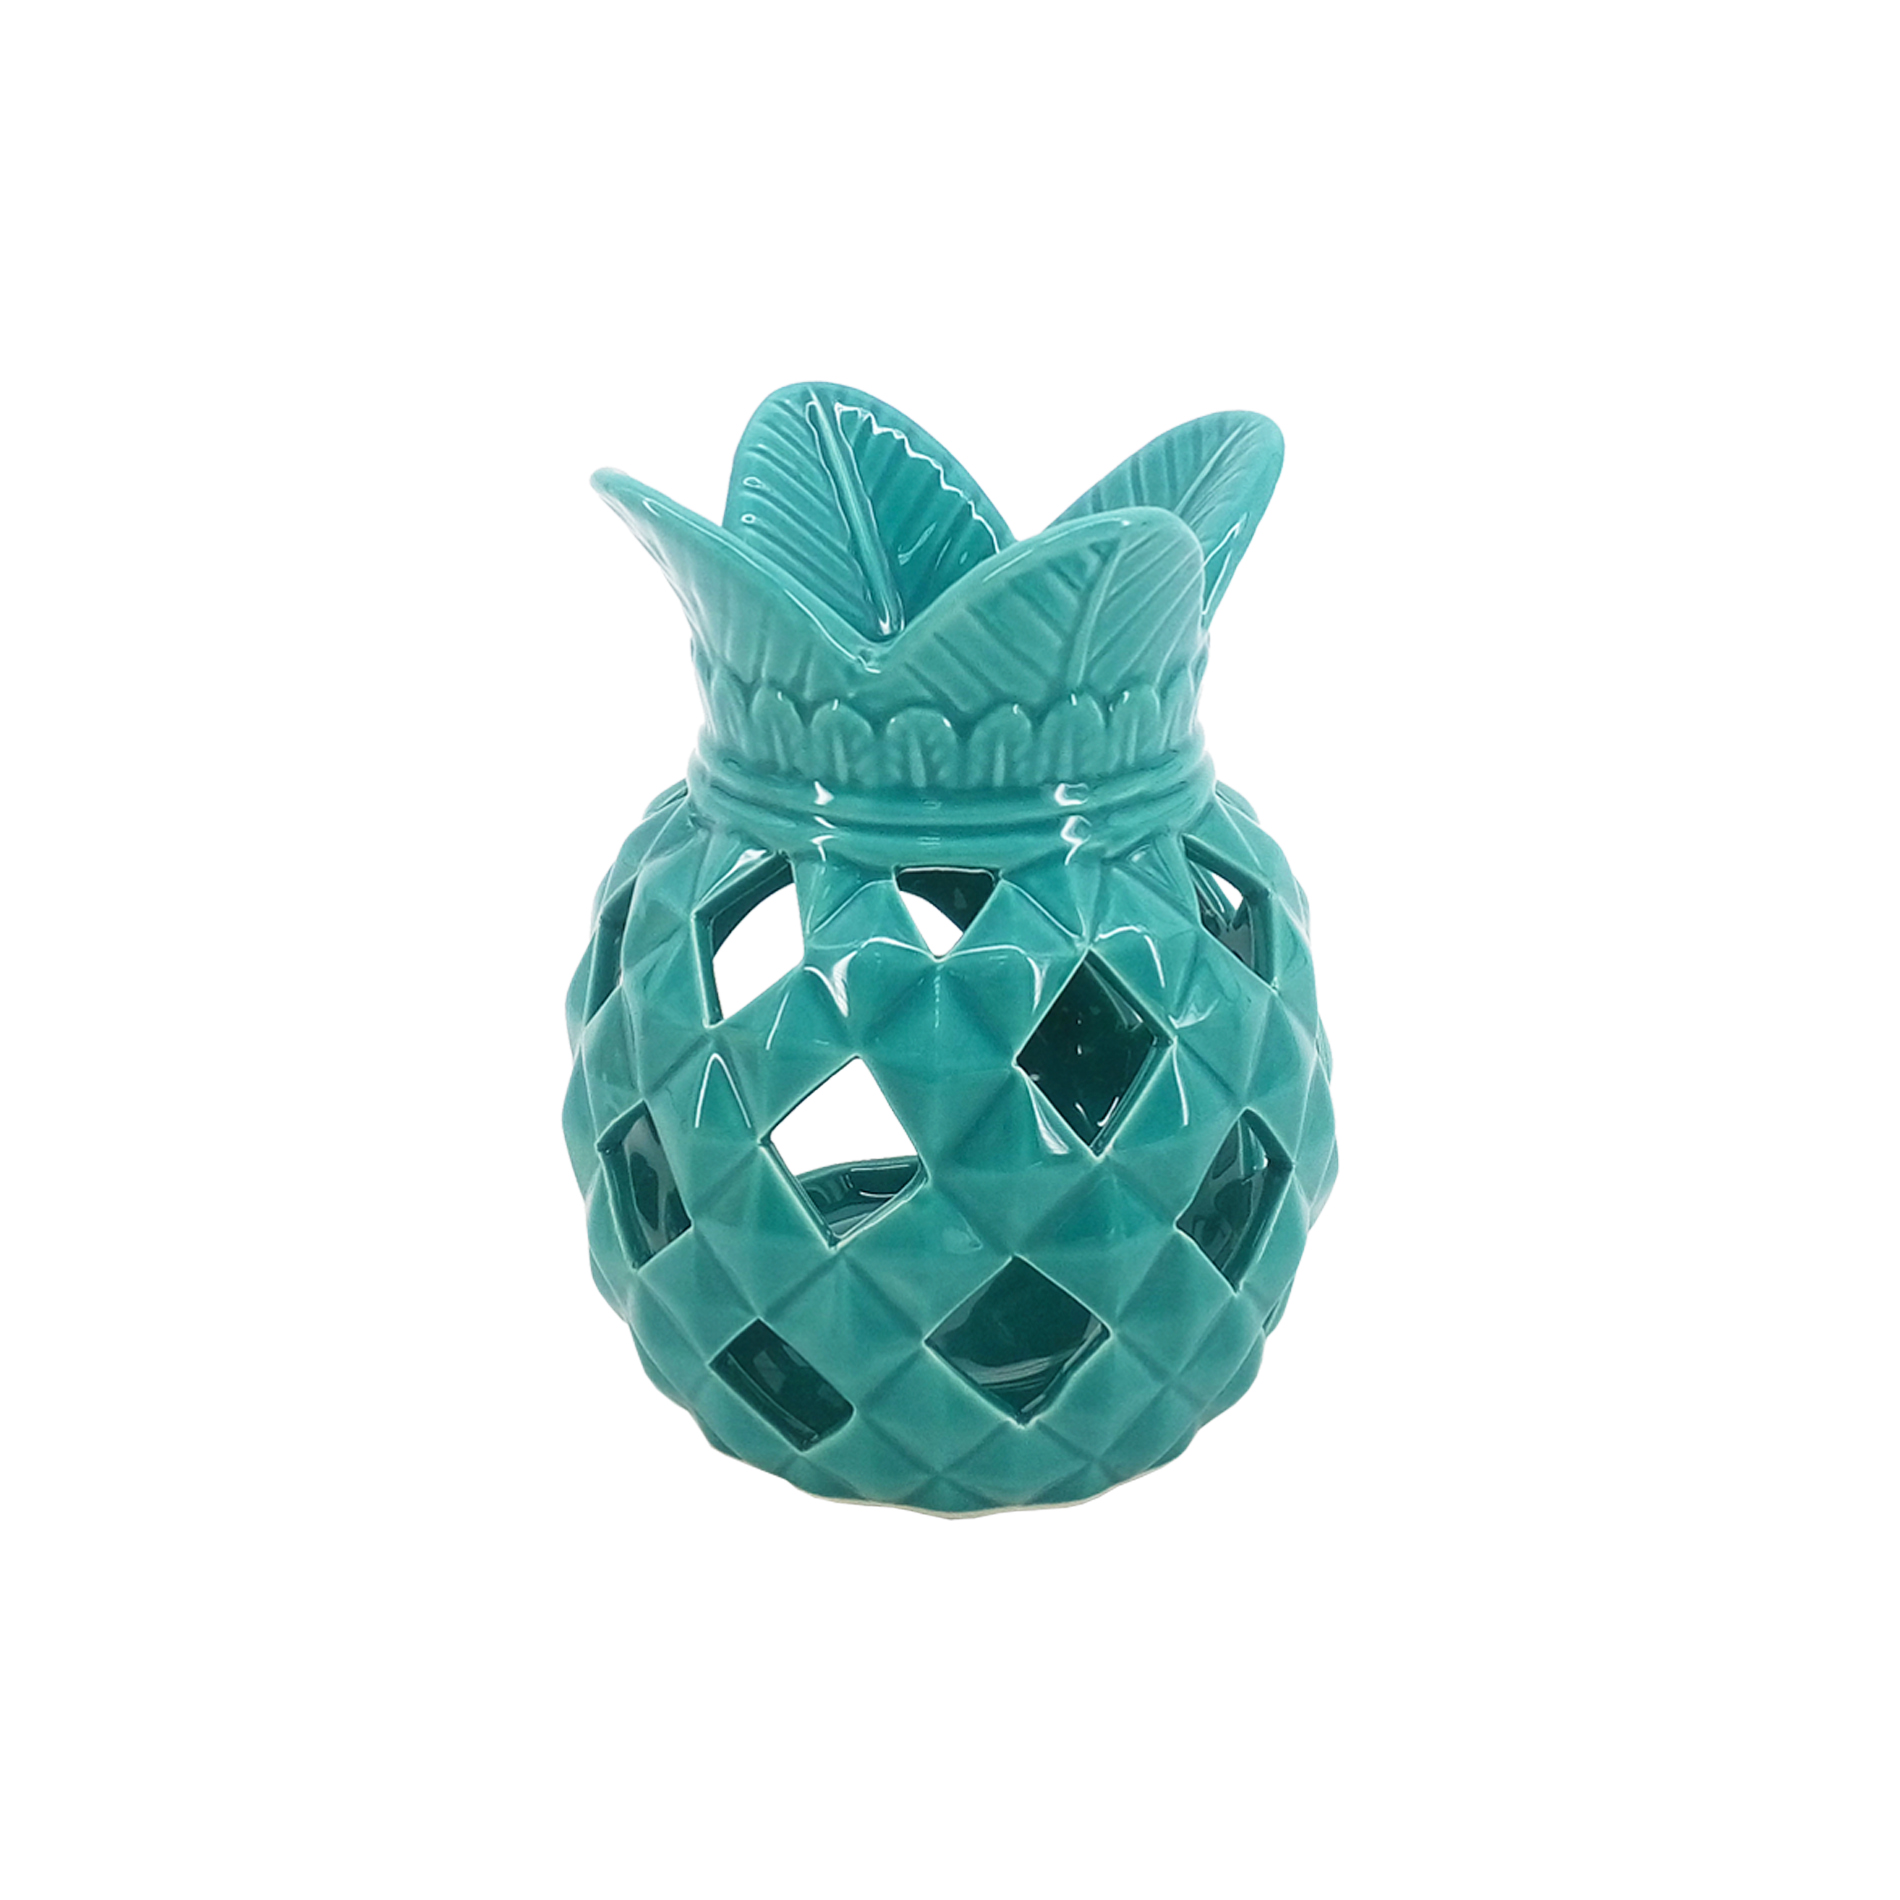 Ceramic Pinapple - Teal/Blue *Limited Availability